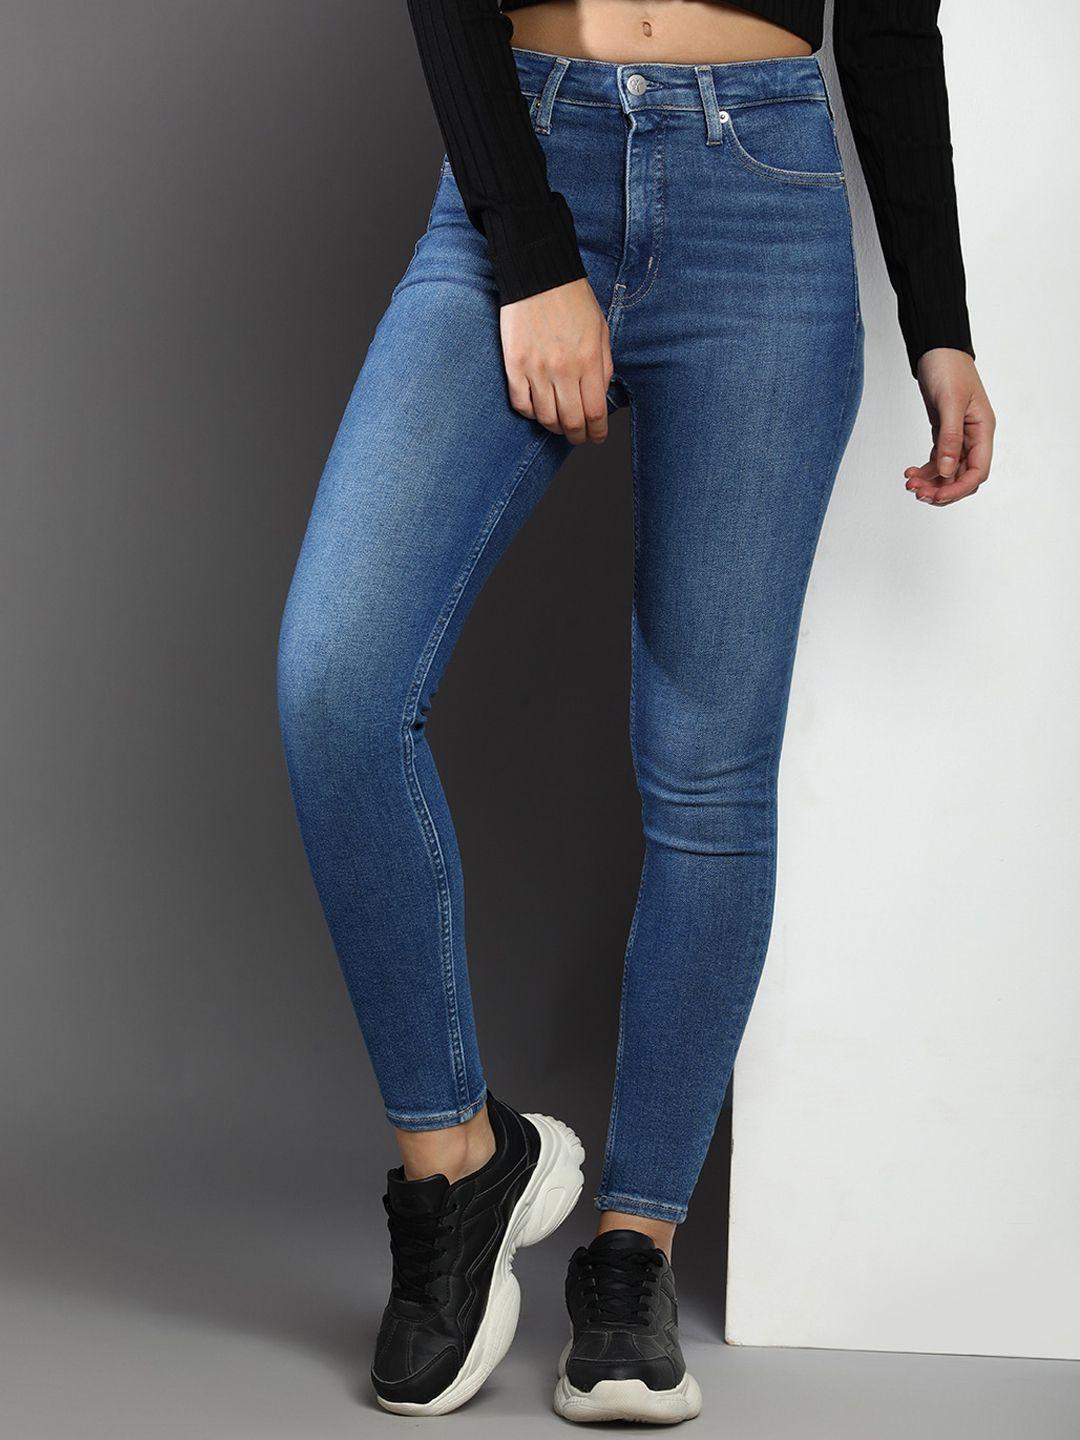 calvin klein jeans women skinny fit high-rise light fade jeans